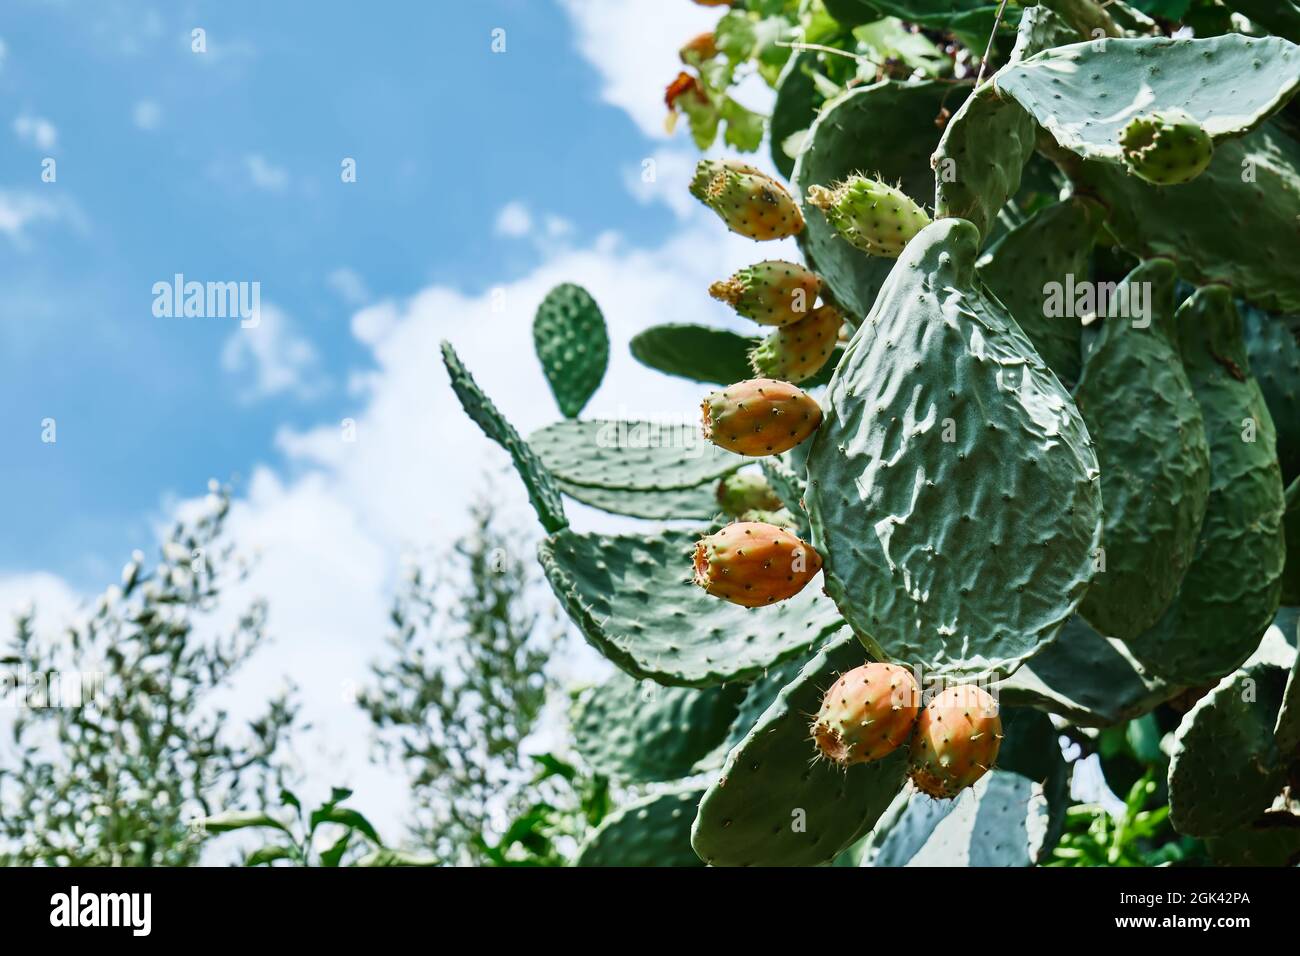 Prickly pear Opuntia Cactus or ficus-indica. Indian fig opuntia with ripe sweet fruits. Edible cactus fruits. Sicily garden. Stock Photo